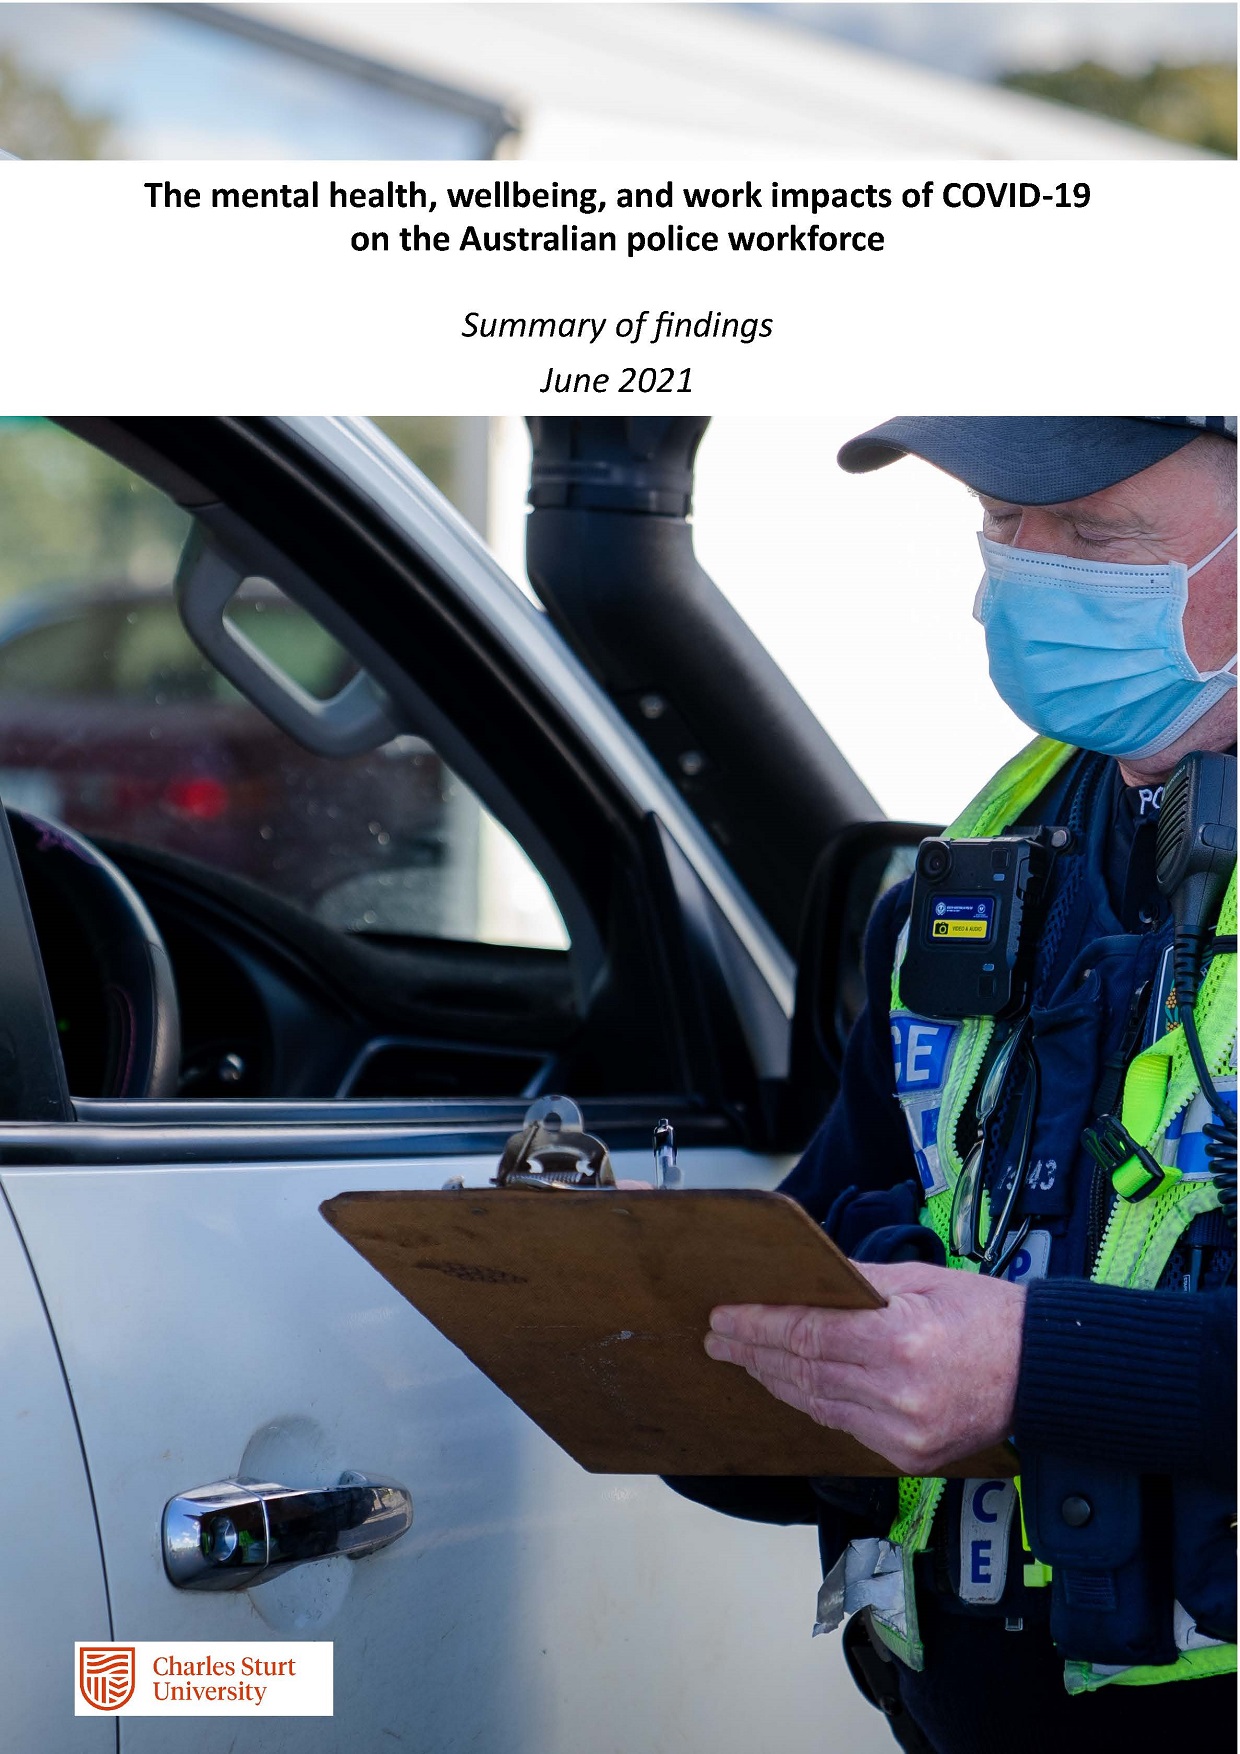 The mental health, wellbeing and work impacts of COVID-19 on the Australian police workforce